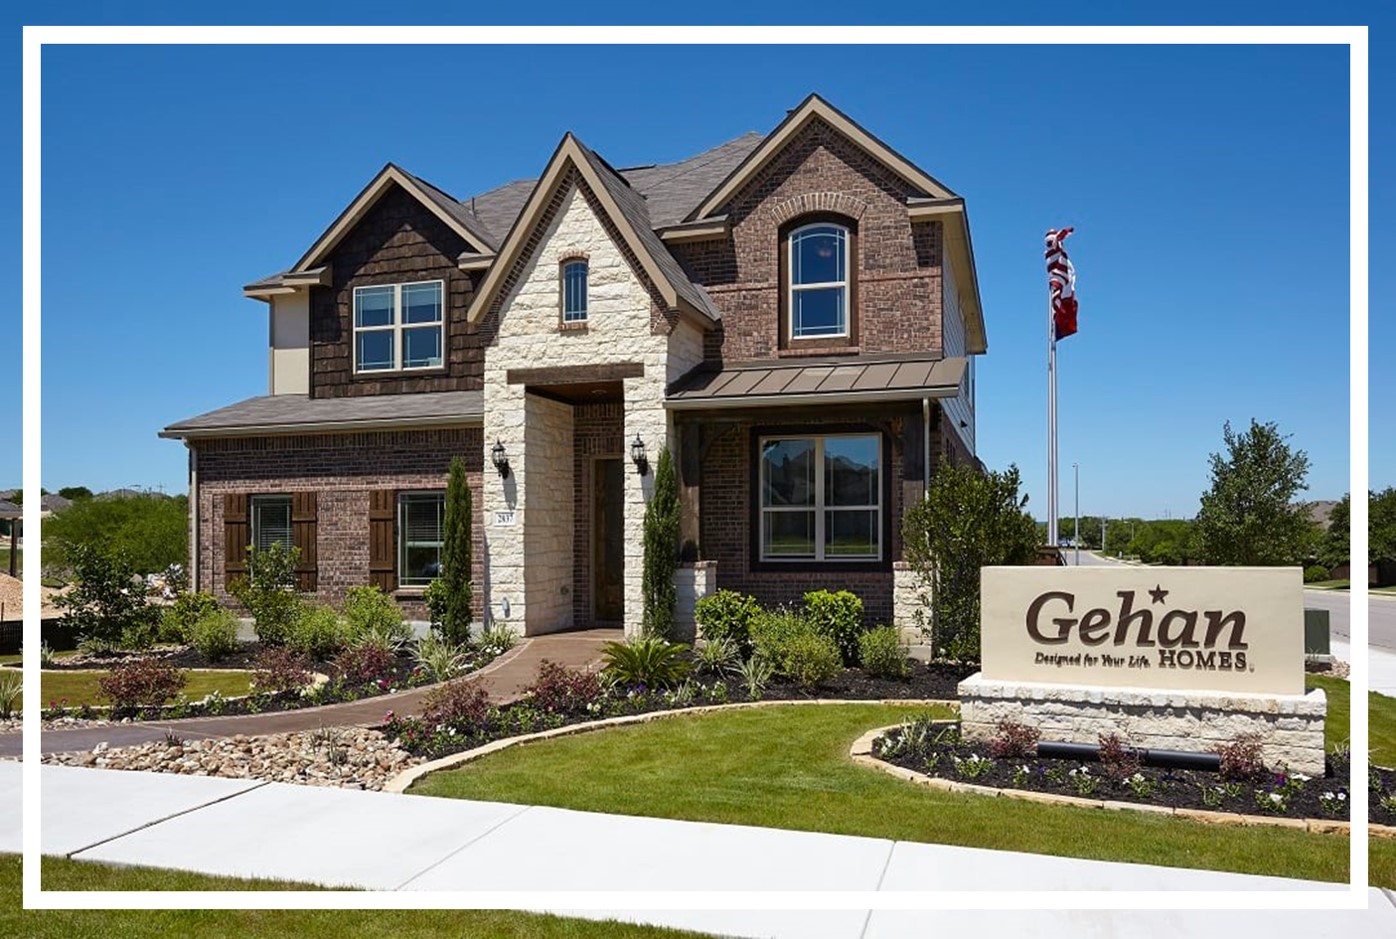 Gehan Homes Selects Clare